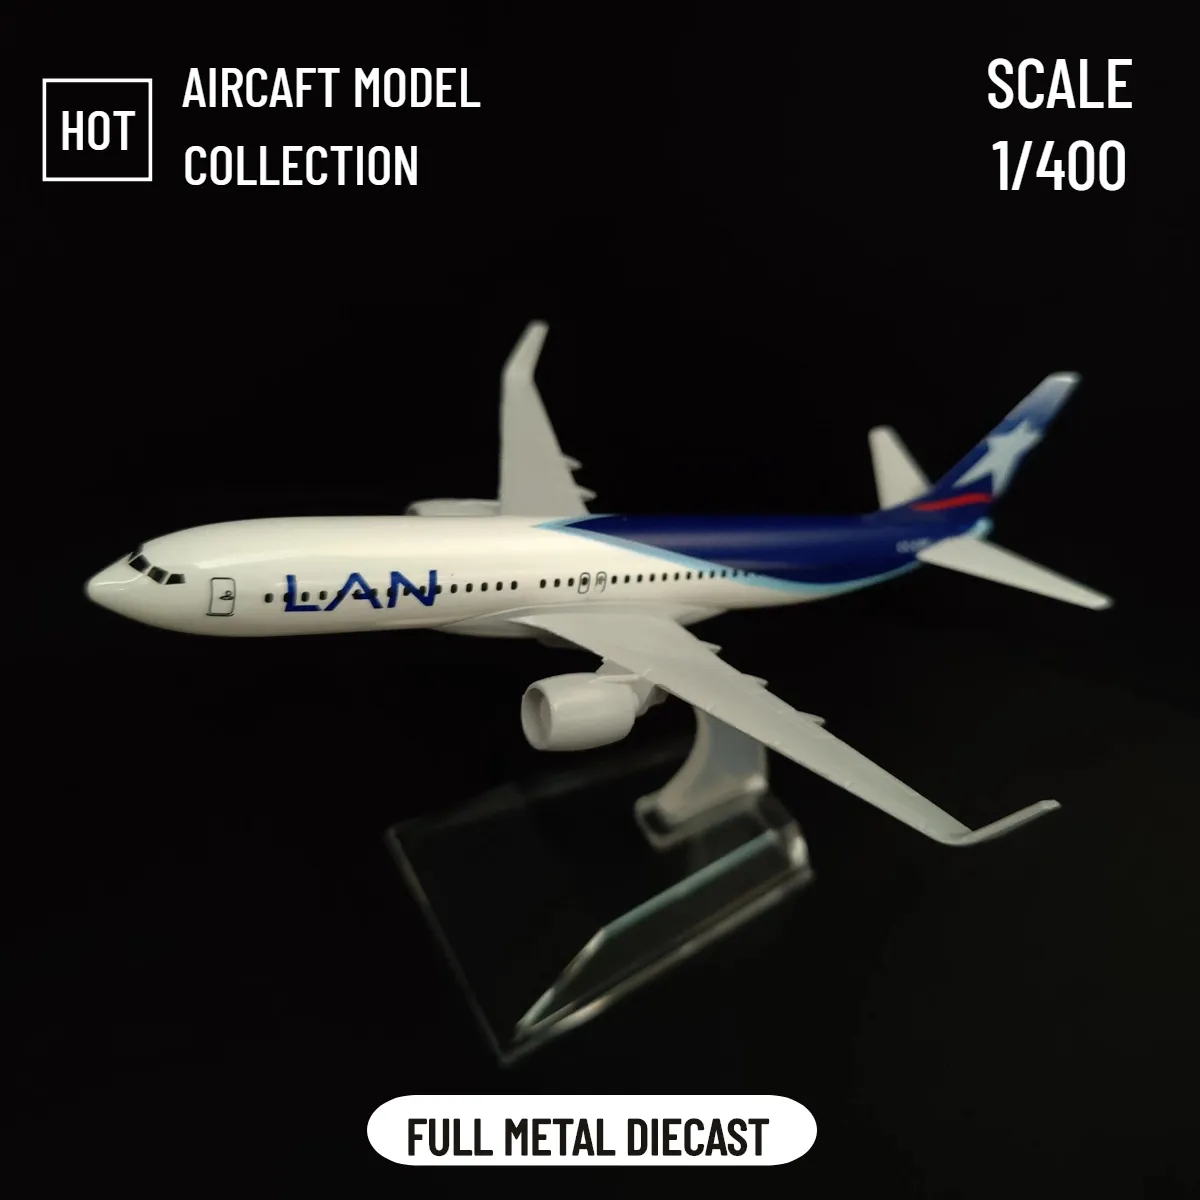 Aircraft Modle Scale 1 400 Metal Aircraft Replica 15cm Chile LAN LATAM GOL TAM Airlines Boeing Diecast Model Aviation Collectible Miniature 230508